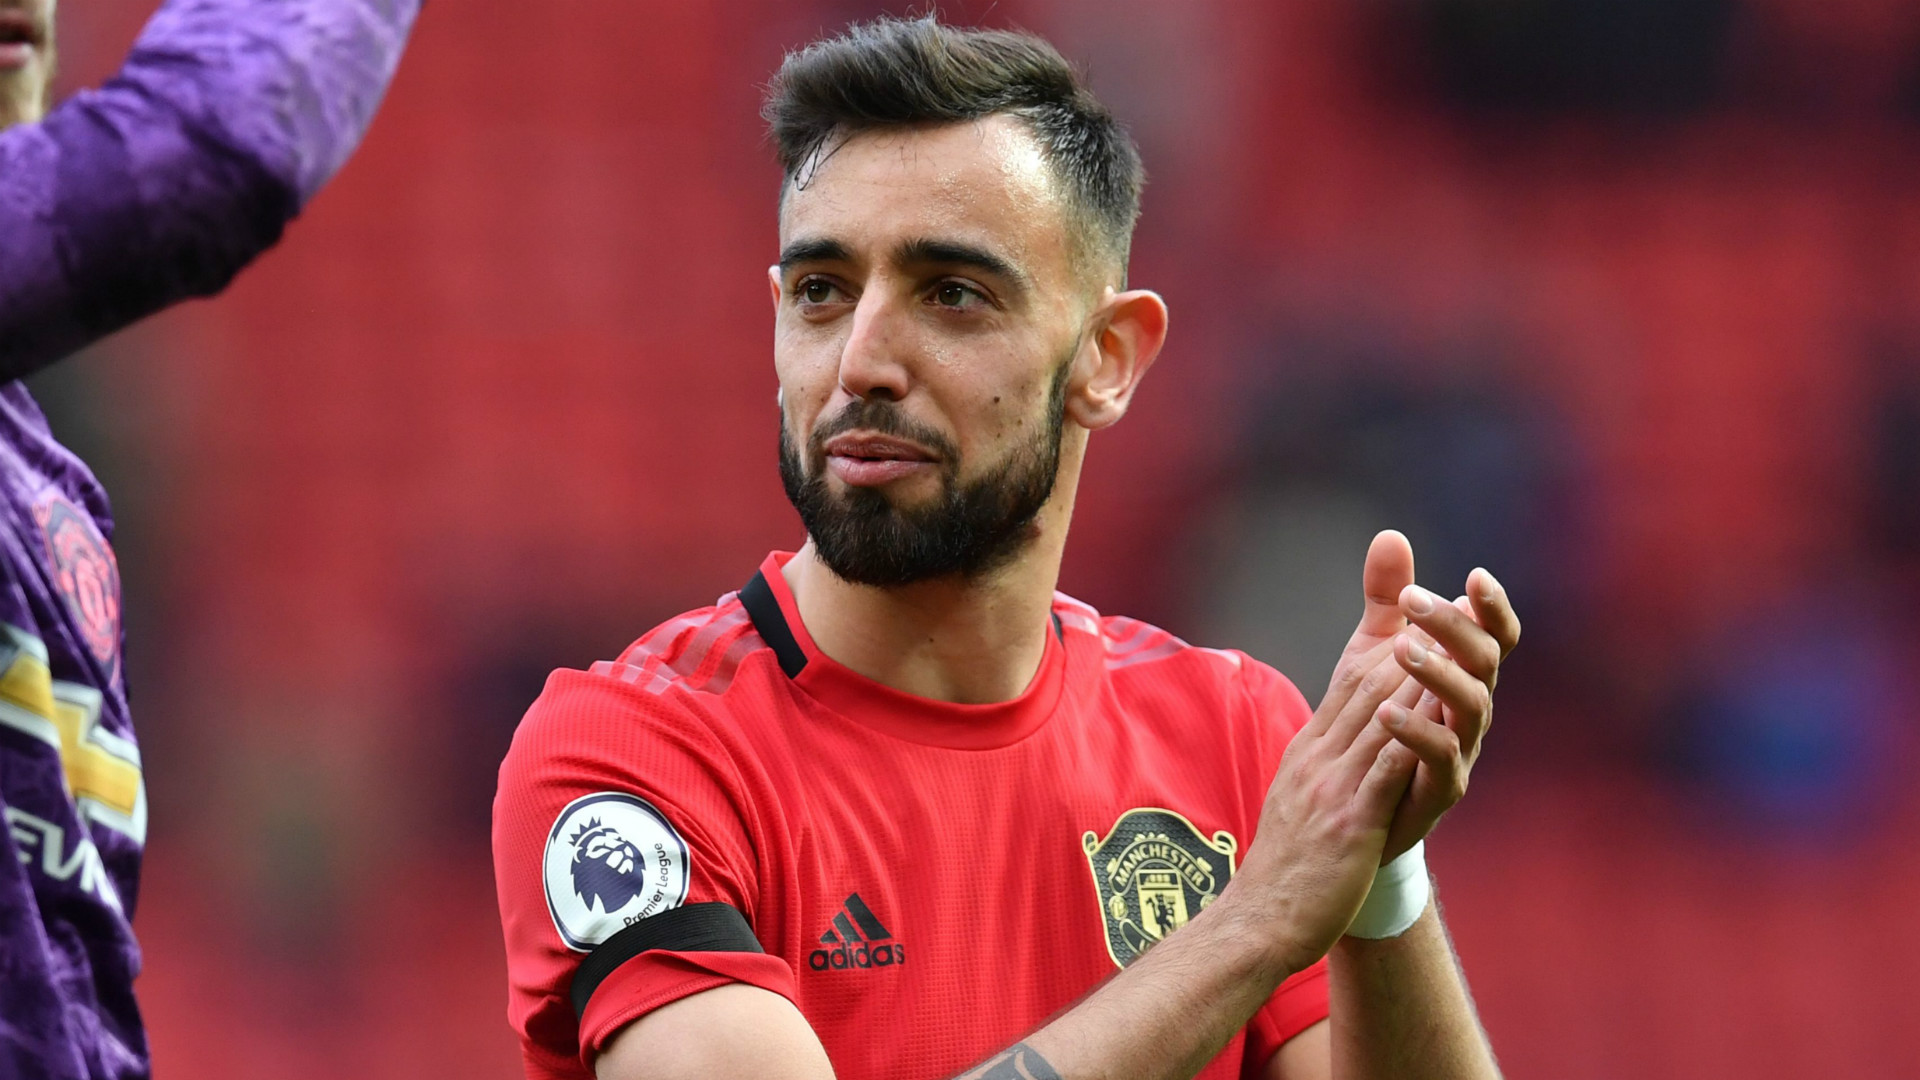 'Fernandes is a born winner' - McTominay excited about Man Utd's new Portuguese star